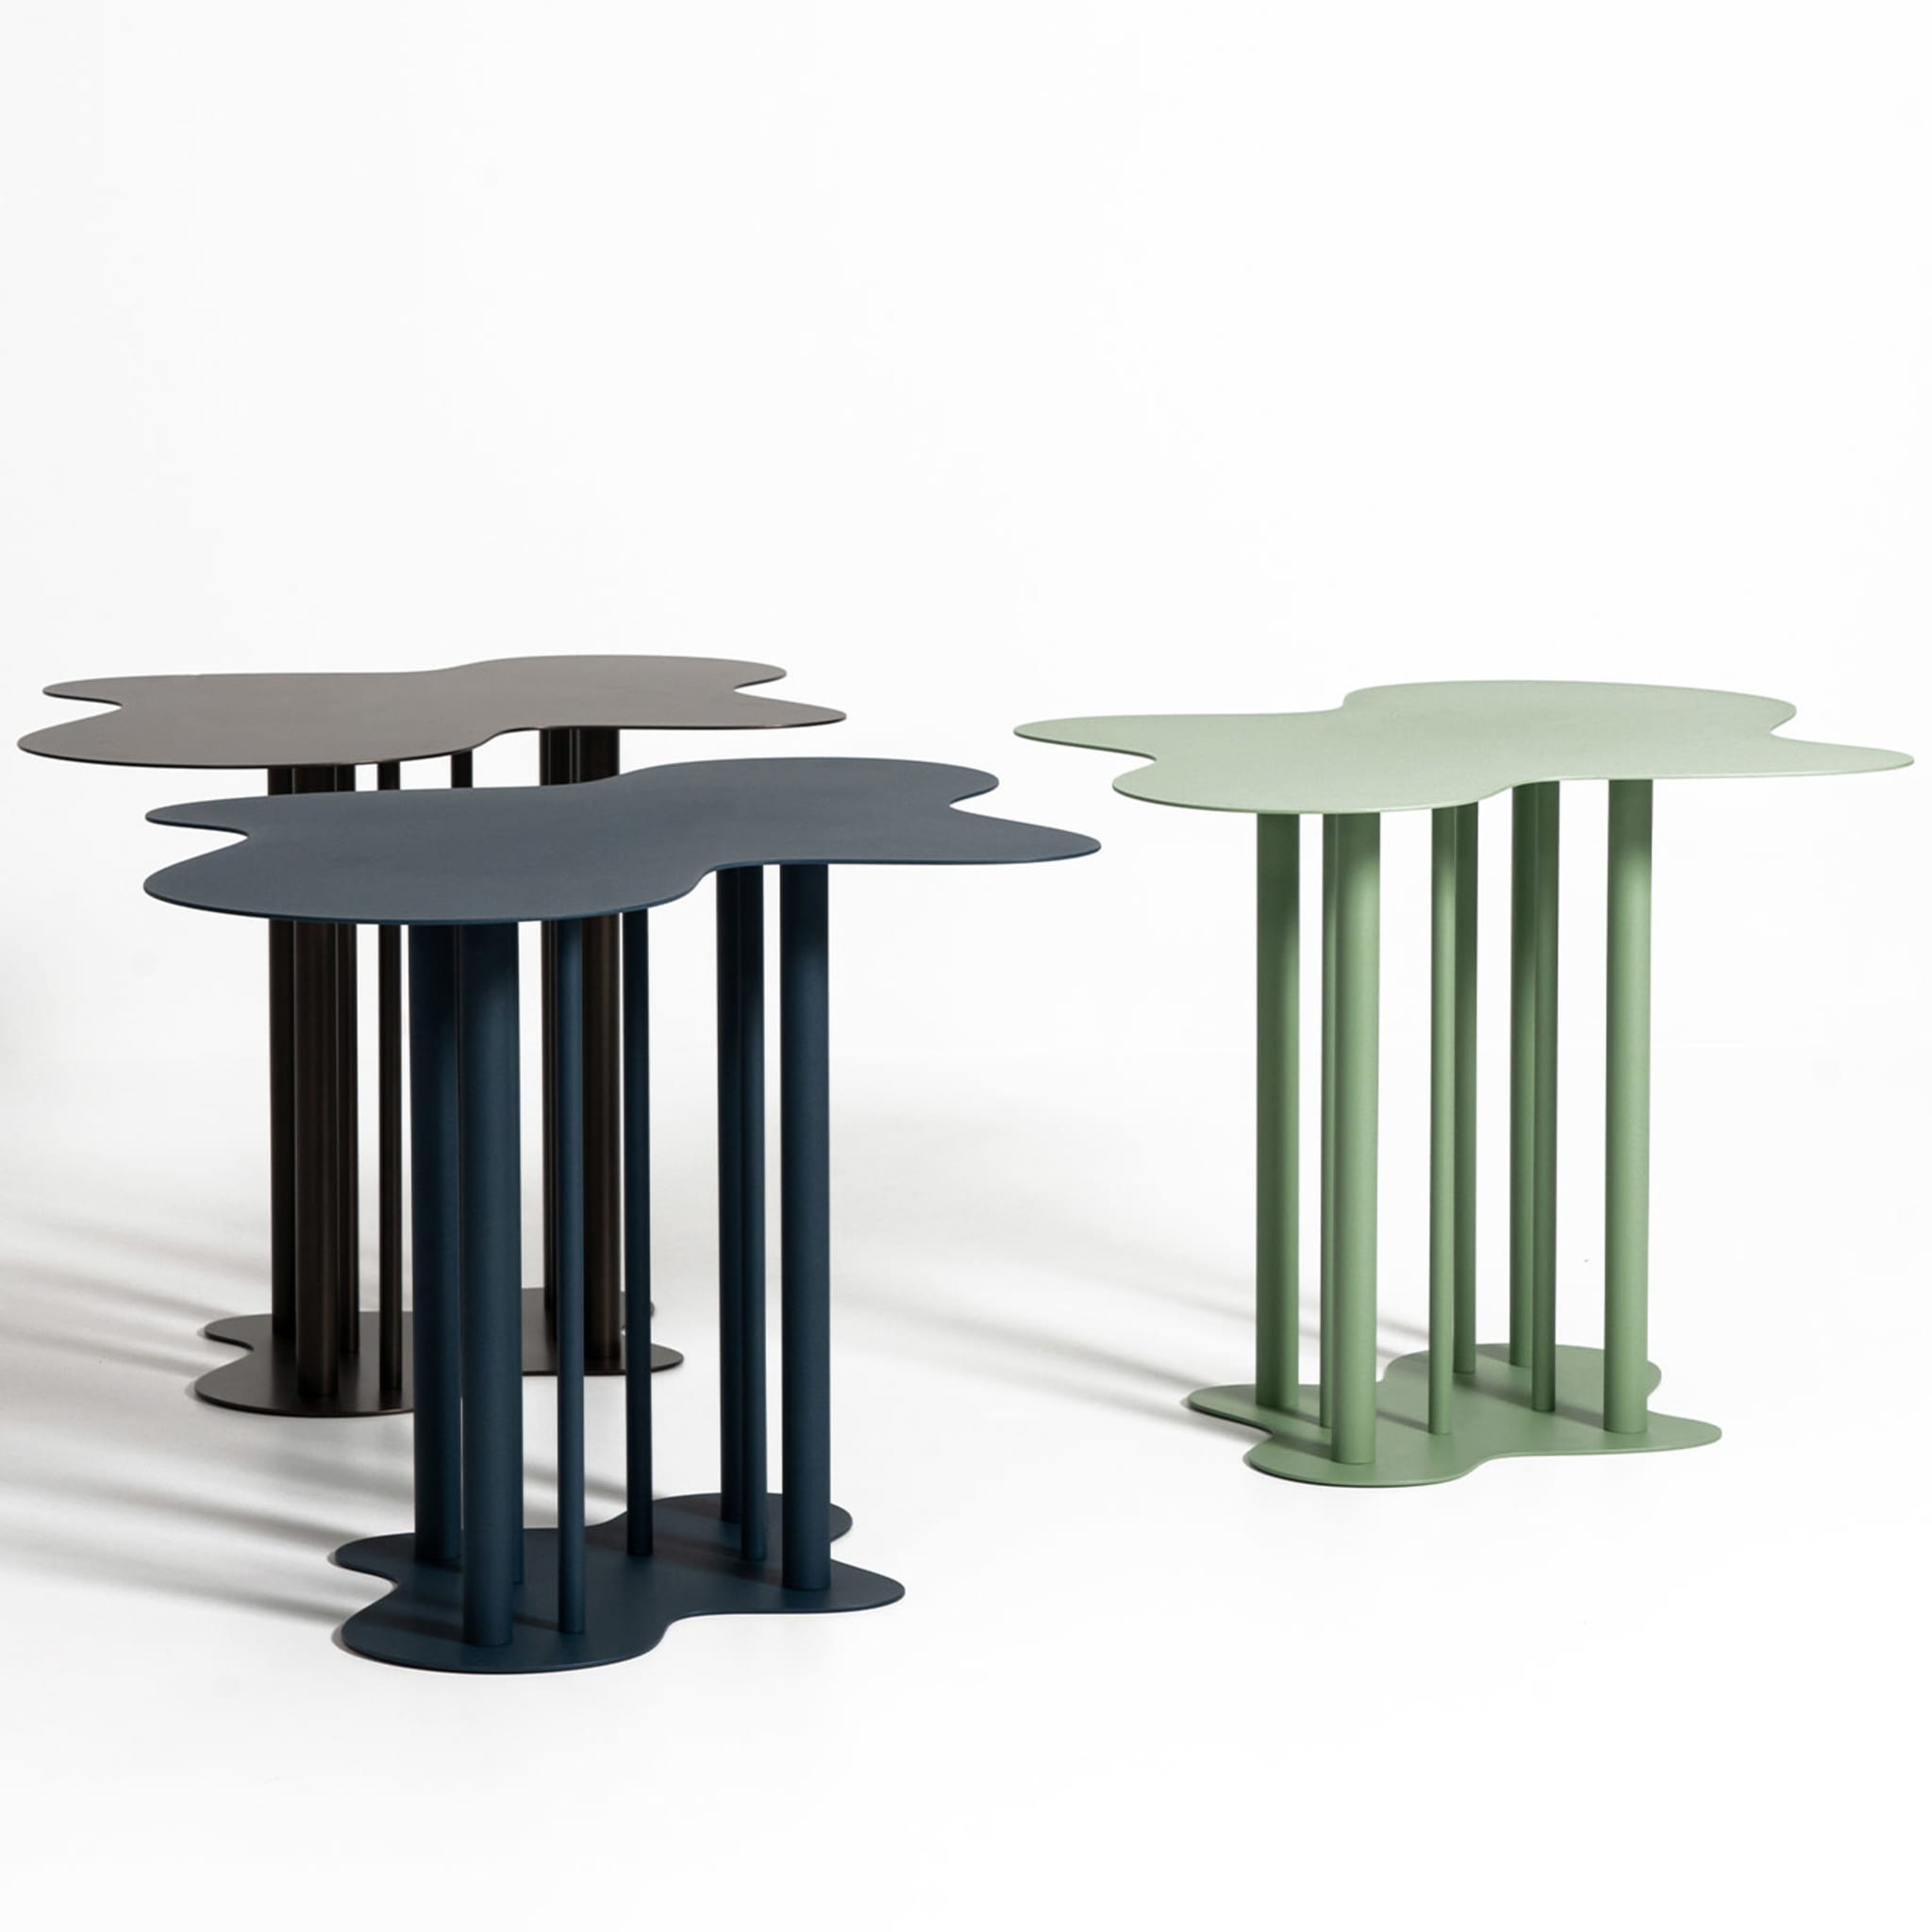 Nuvola 03 Pale Green Side Table by Mario Cucinella - Alternative view 3